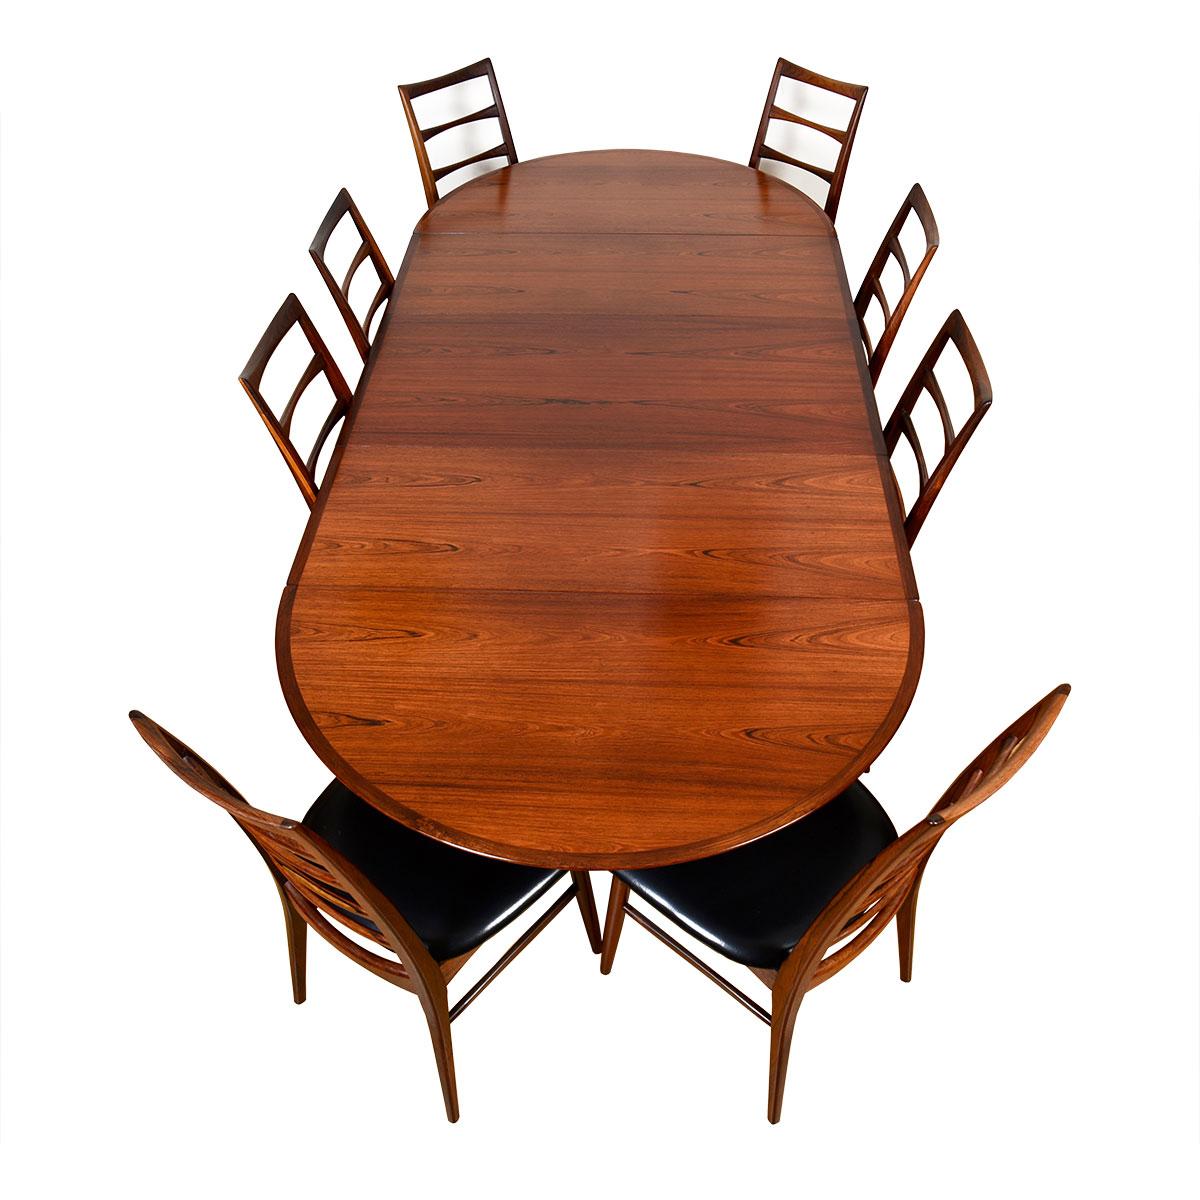 20th Century Vodder Danish Rosewood Dining Table with Removable Drop Leaves + Middle Leaf For Sale